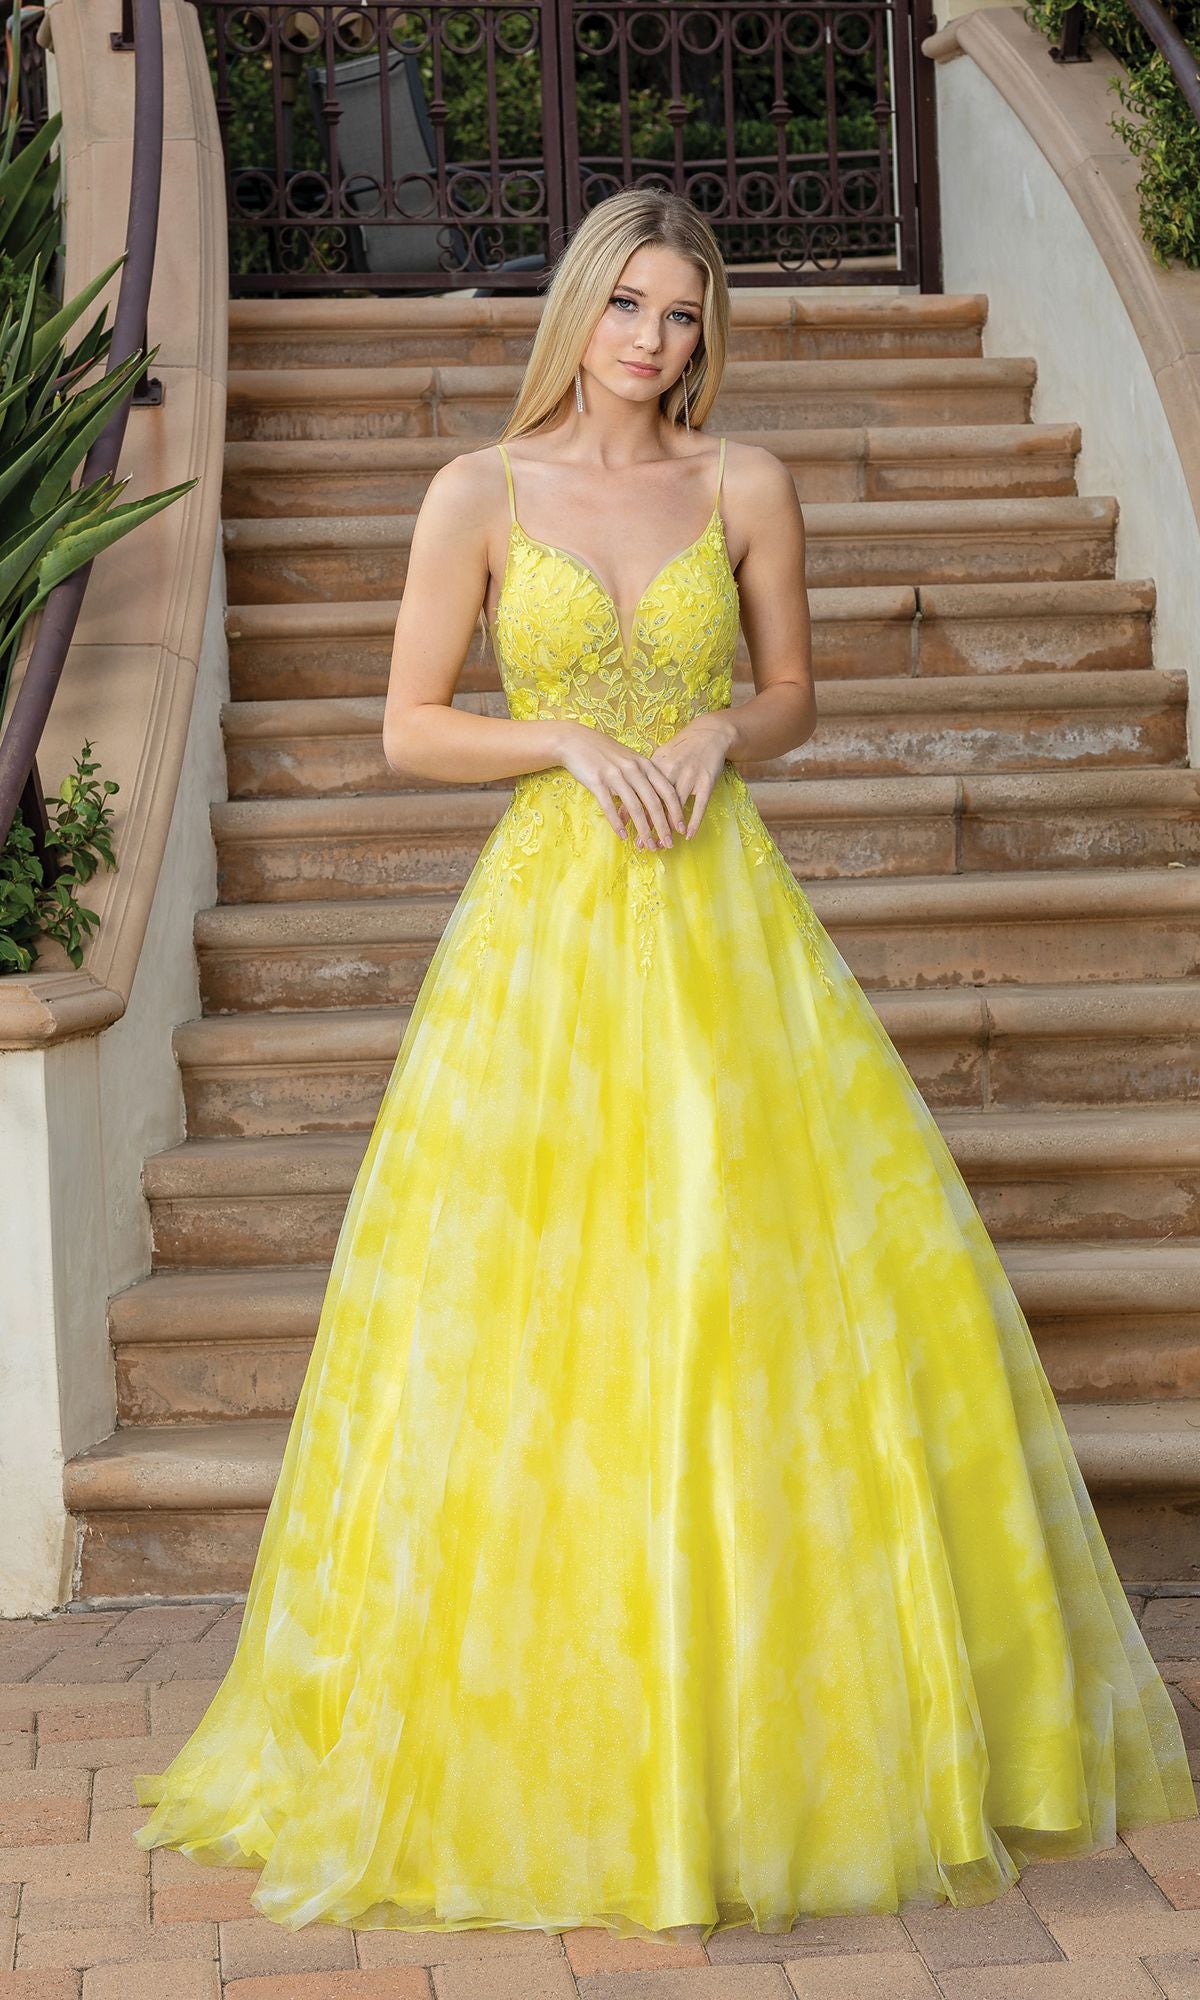 Tie Dye A-line Pleated Long Prom Dress · dreamdressy · Online Store Powered  by Storenvy